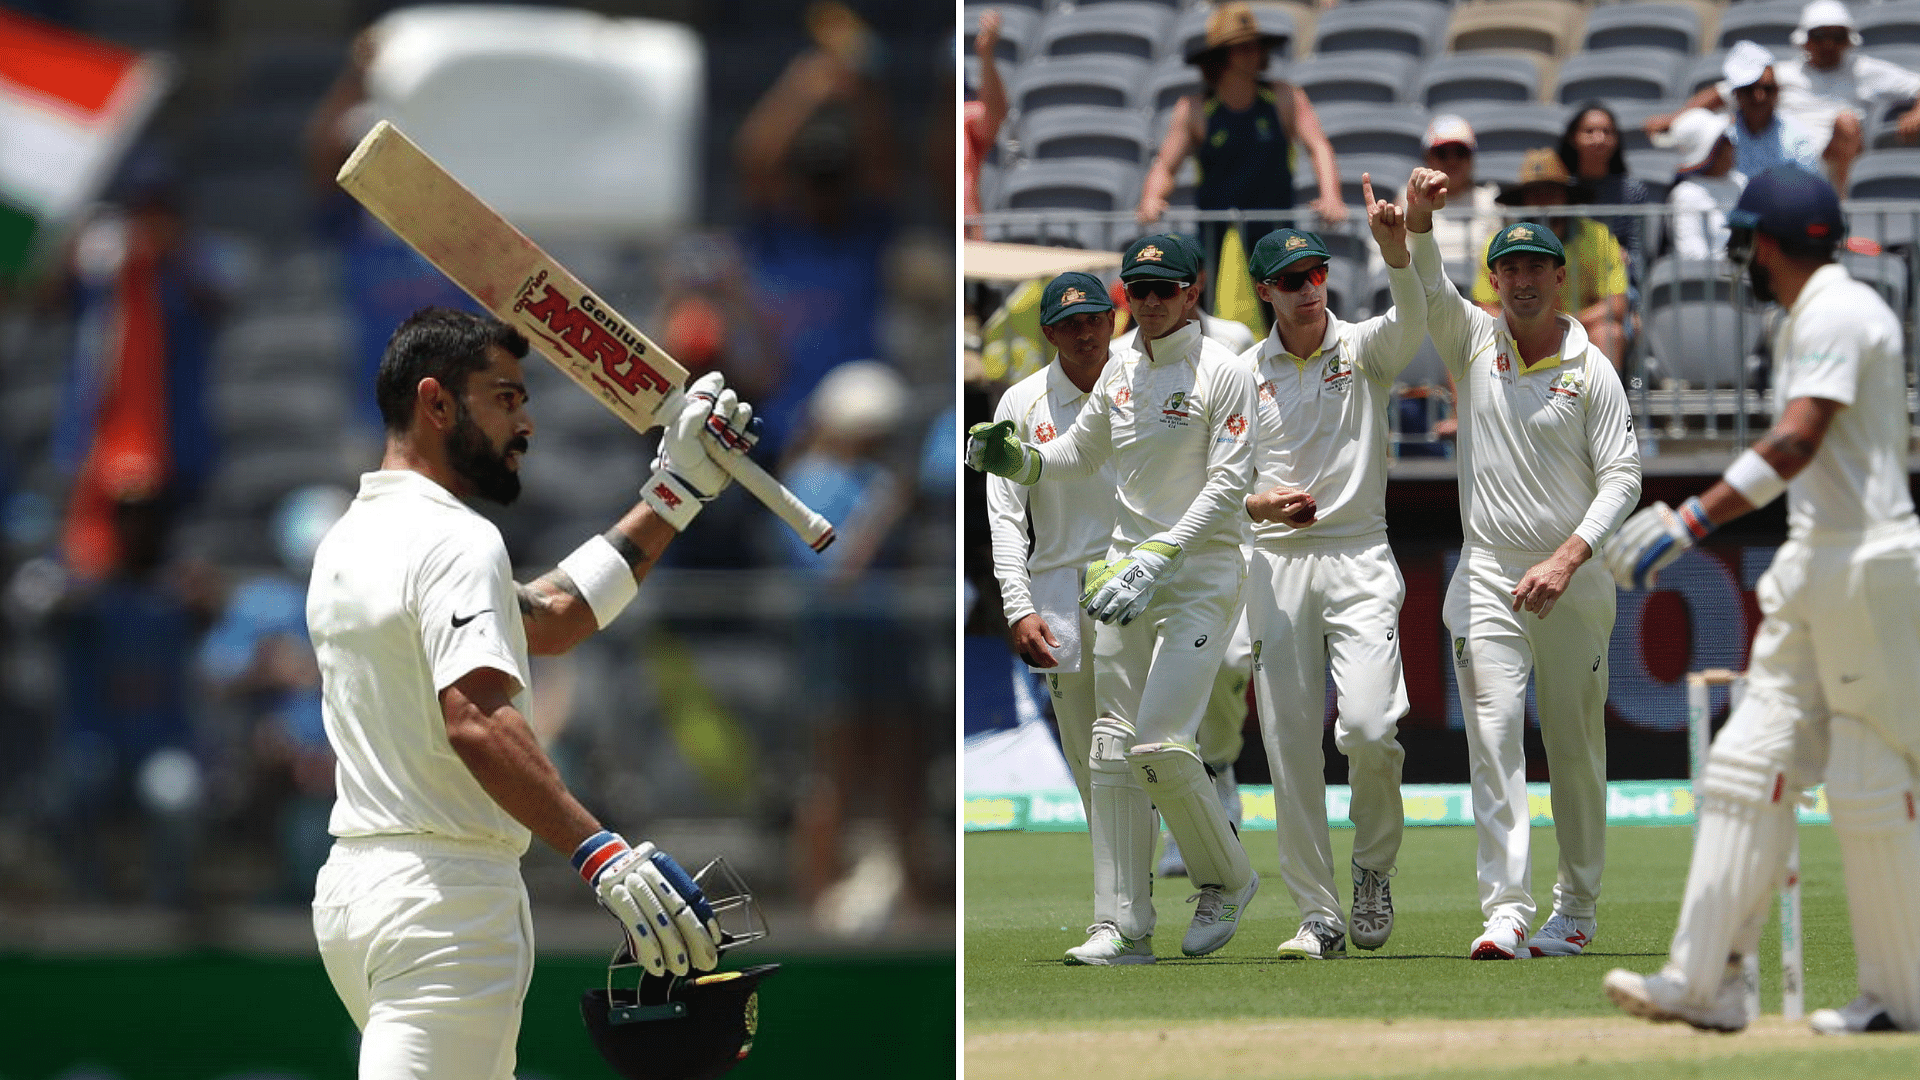 Virat Kohli’s 25th Test hundred ended in controversial fashion through a contentious catch on Day 3 of the Perth Test.